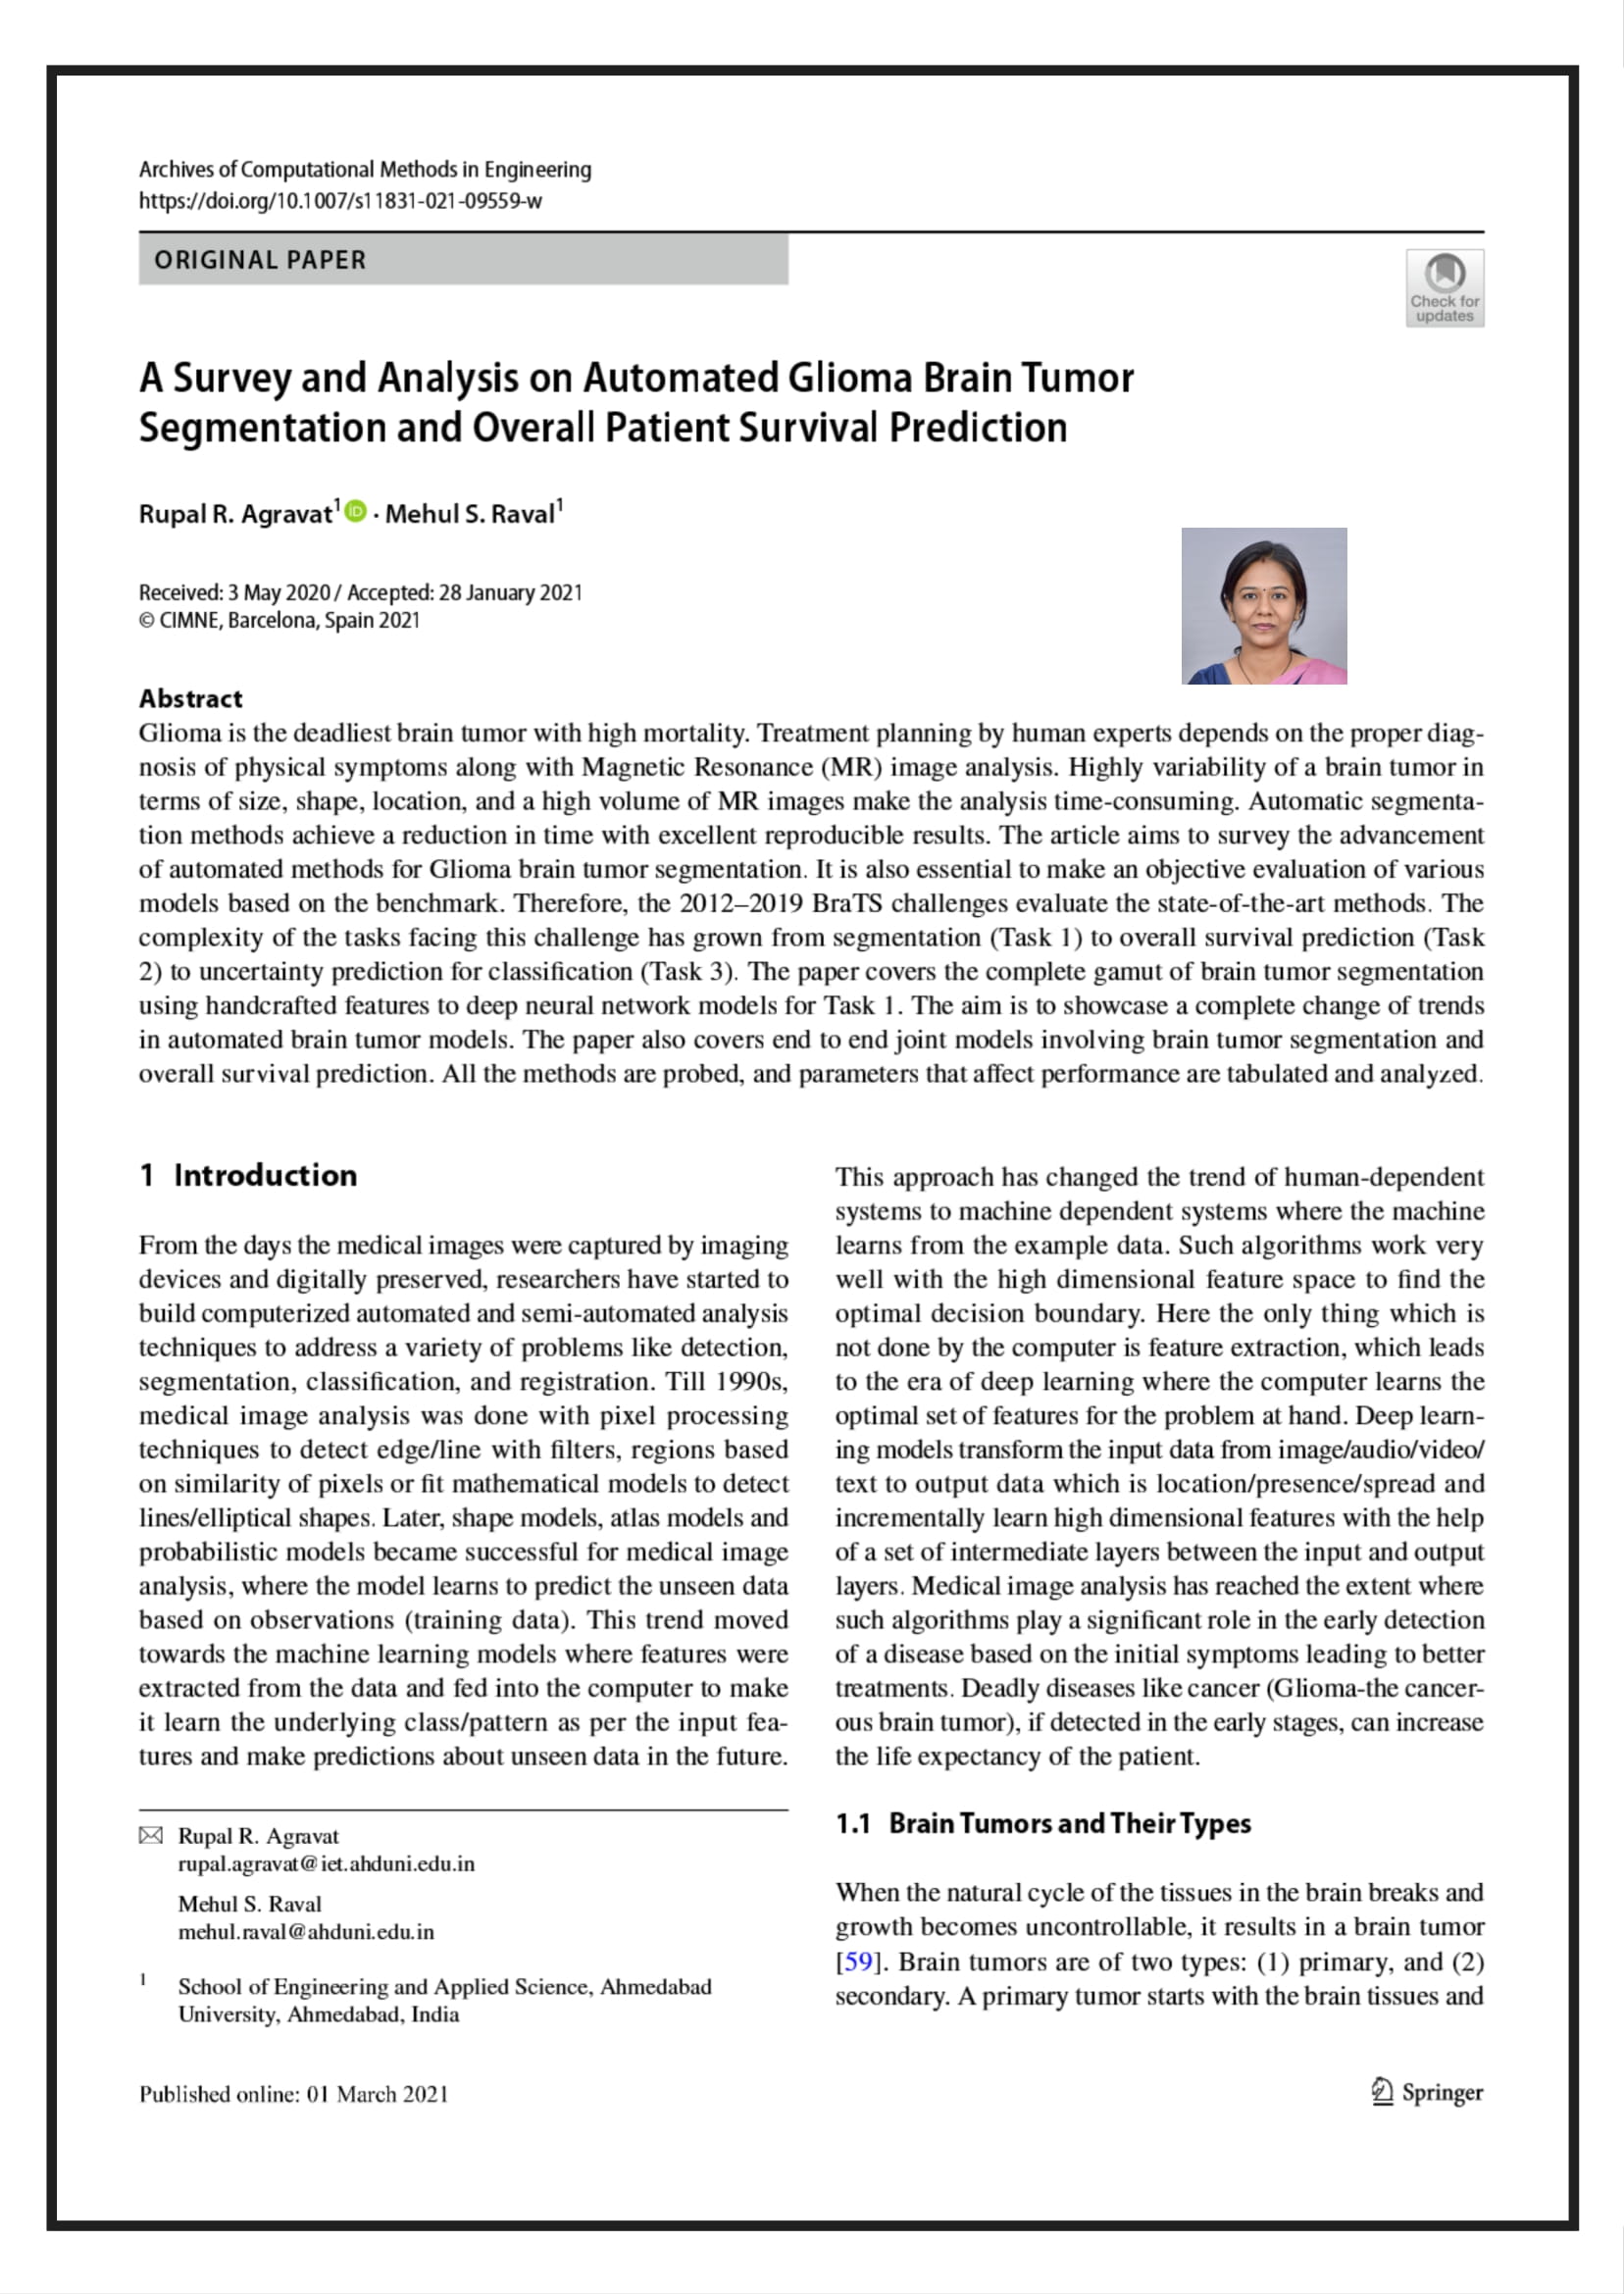 A Survey and Analysis on Automated Glioma Brain Tumor Segmentation and Overall Patient Survival Prediction